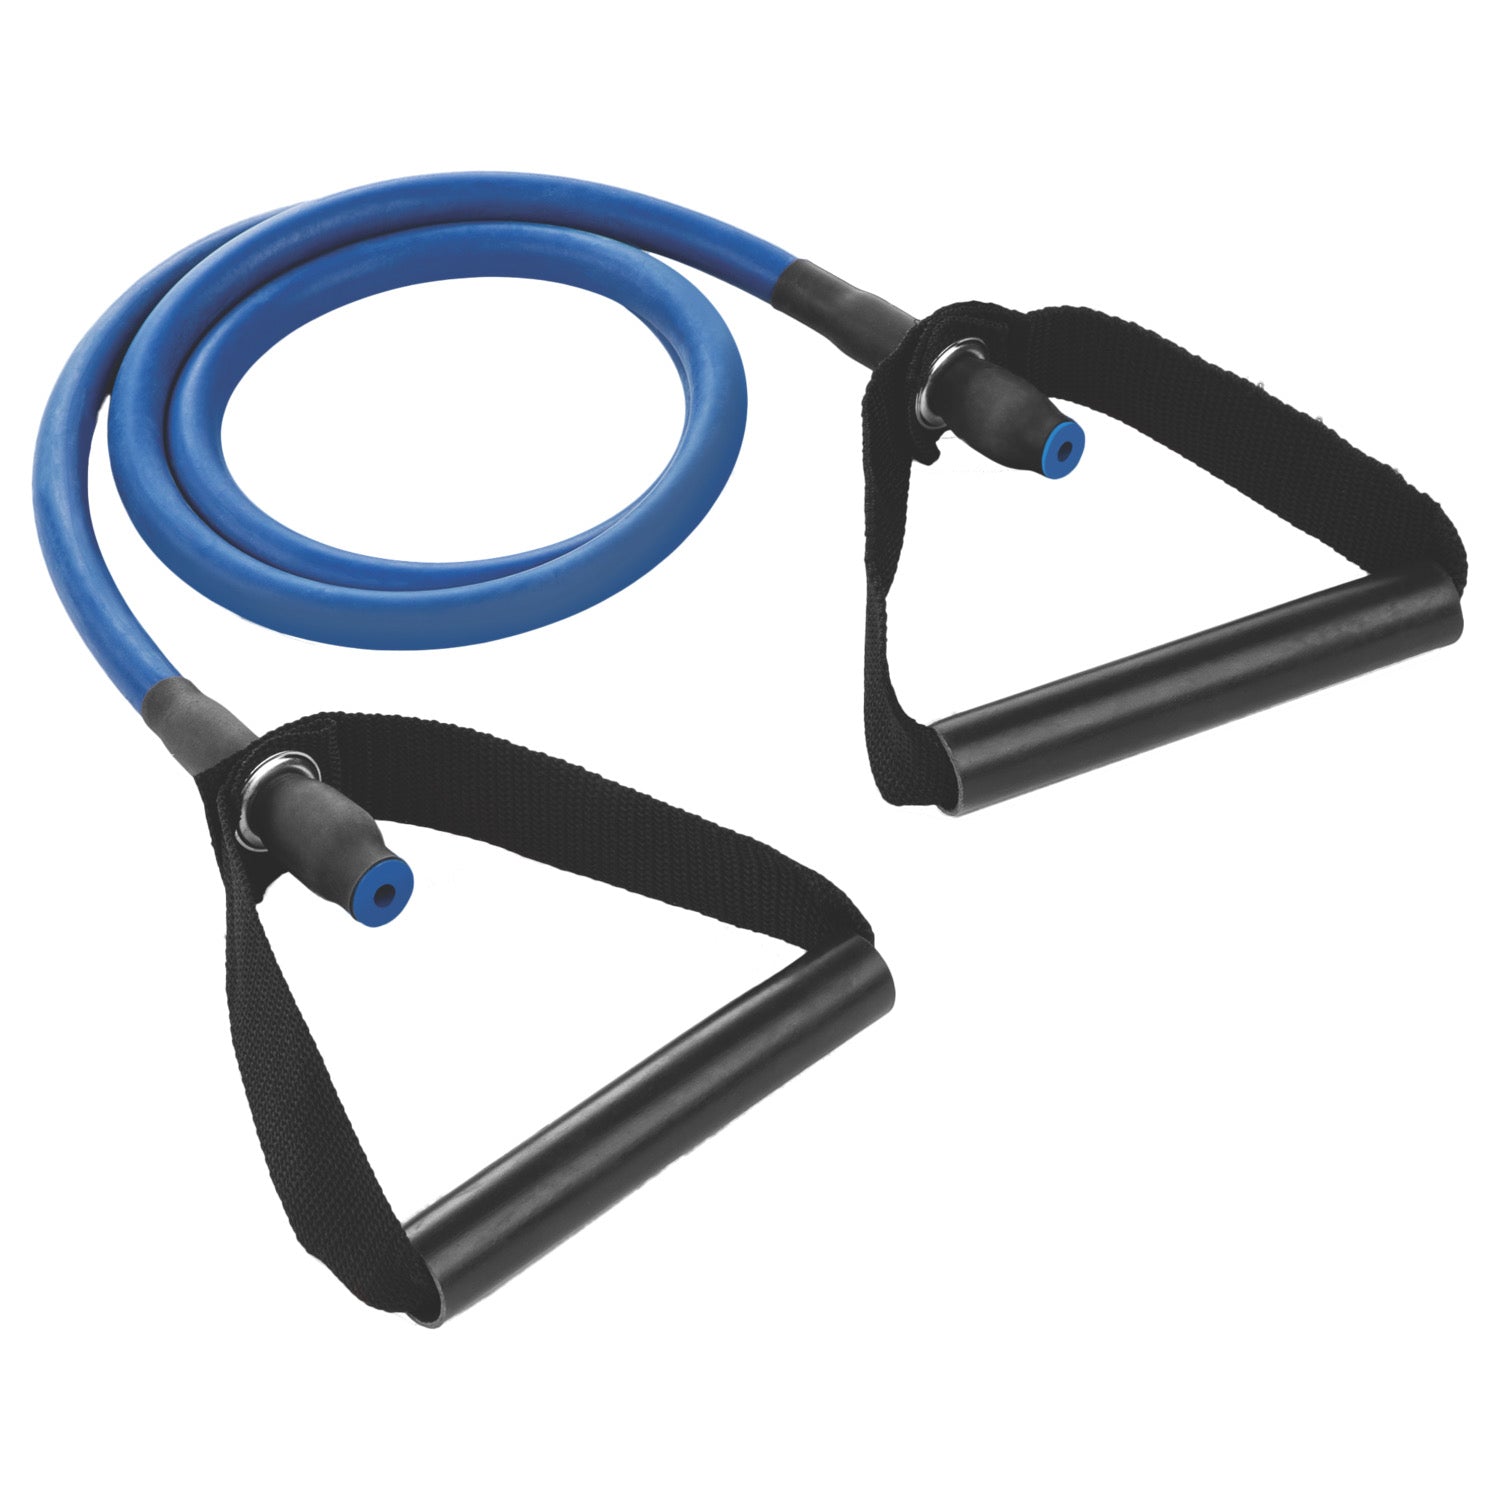 XP Resistance Tubing with PVC Handles Series Heavy / Blue RHINO Fitness __label:NEW! fitness physical therapy resistance Training tubing